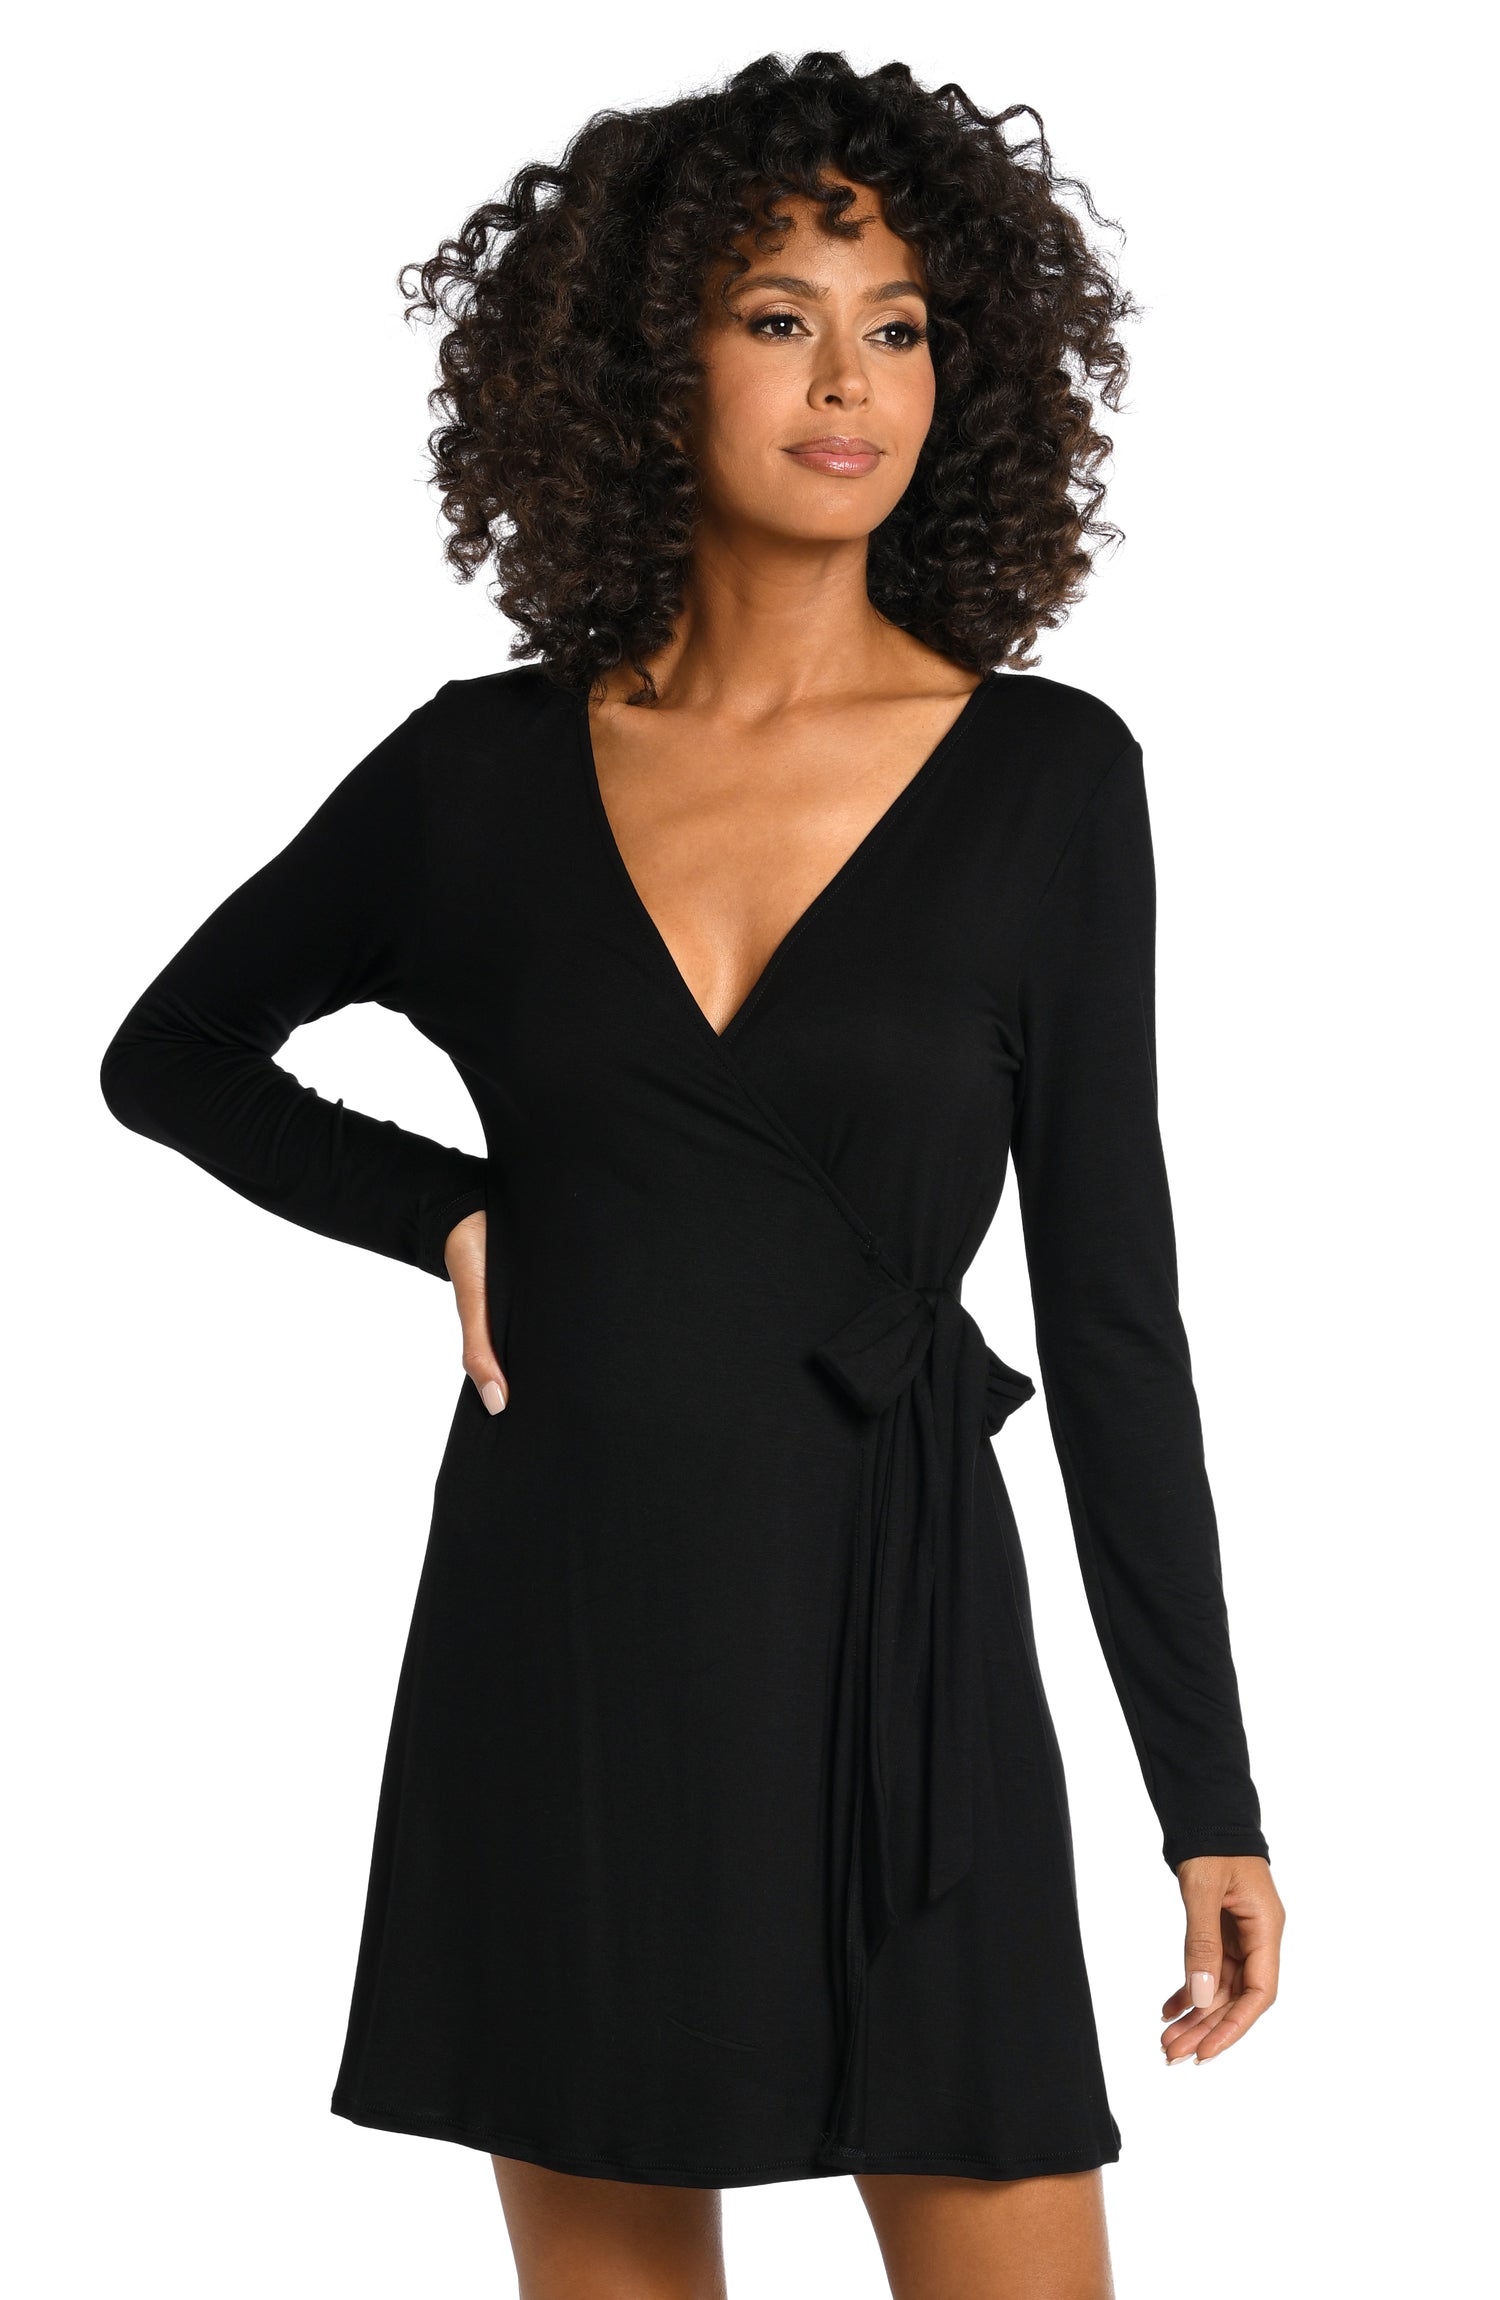 Model is wearing a black wrap dress swimsuit cover up from our Draped Darling collection.